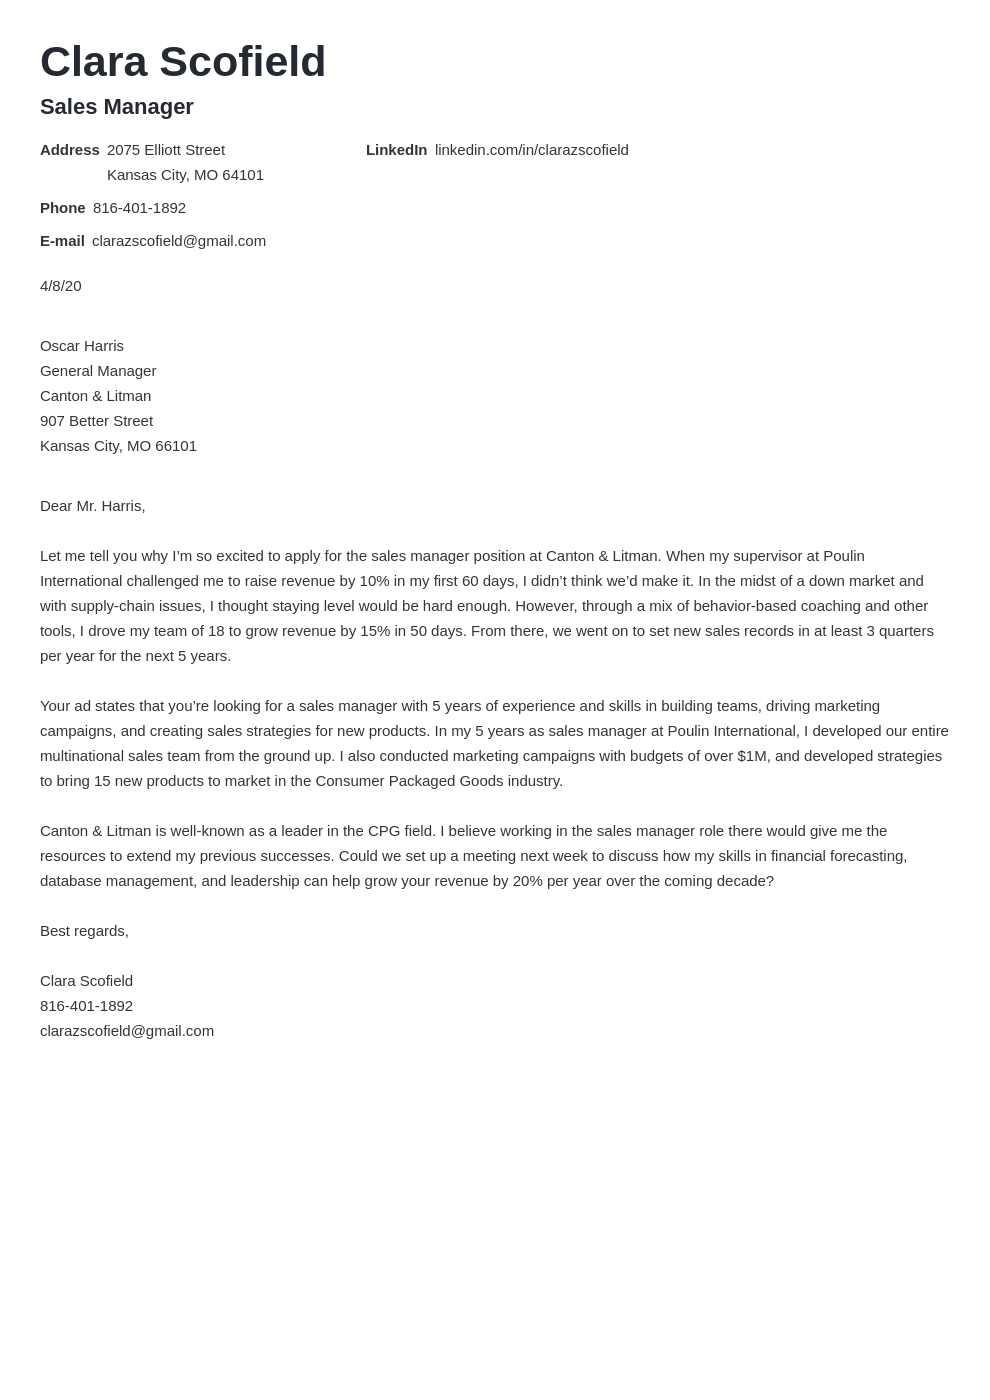 example of application letter for sales job